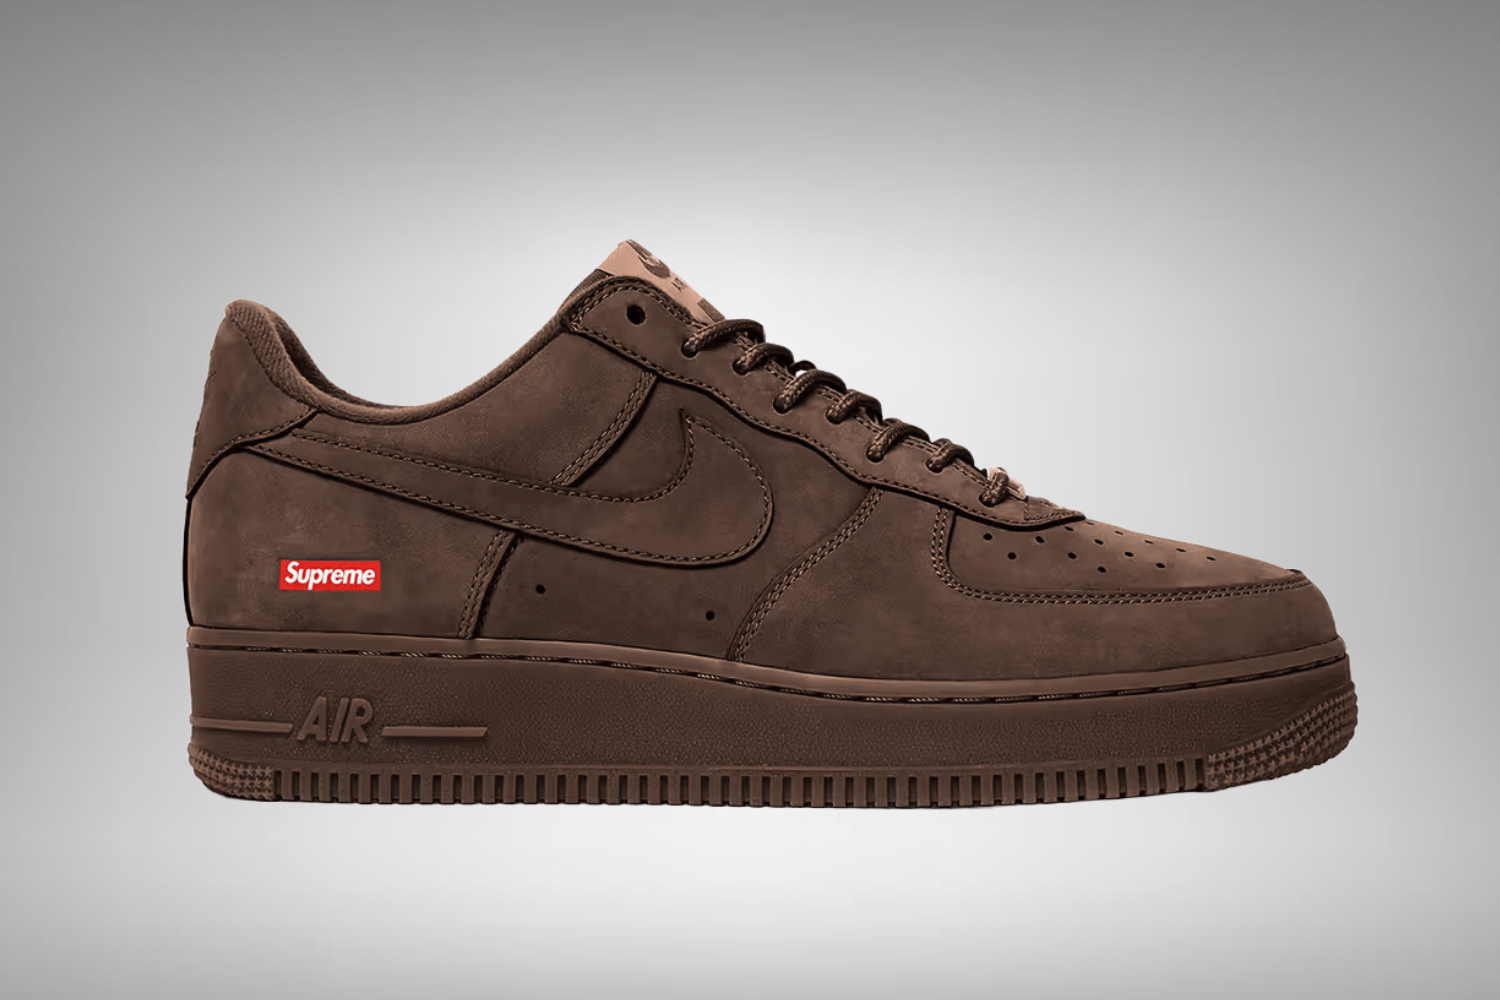 Supreme x Nike Air Force 1 'Baroque Brown' expected in 2023